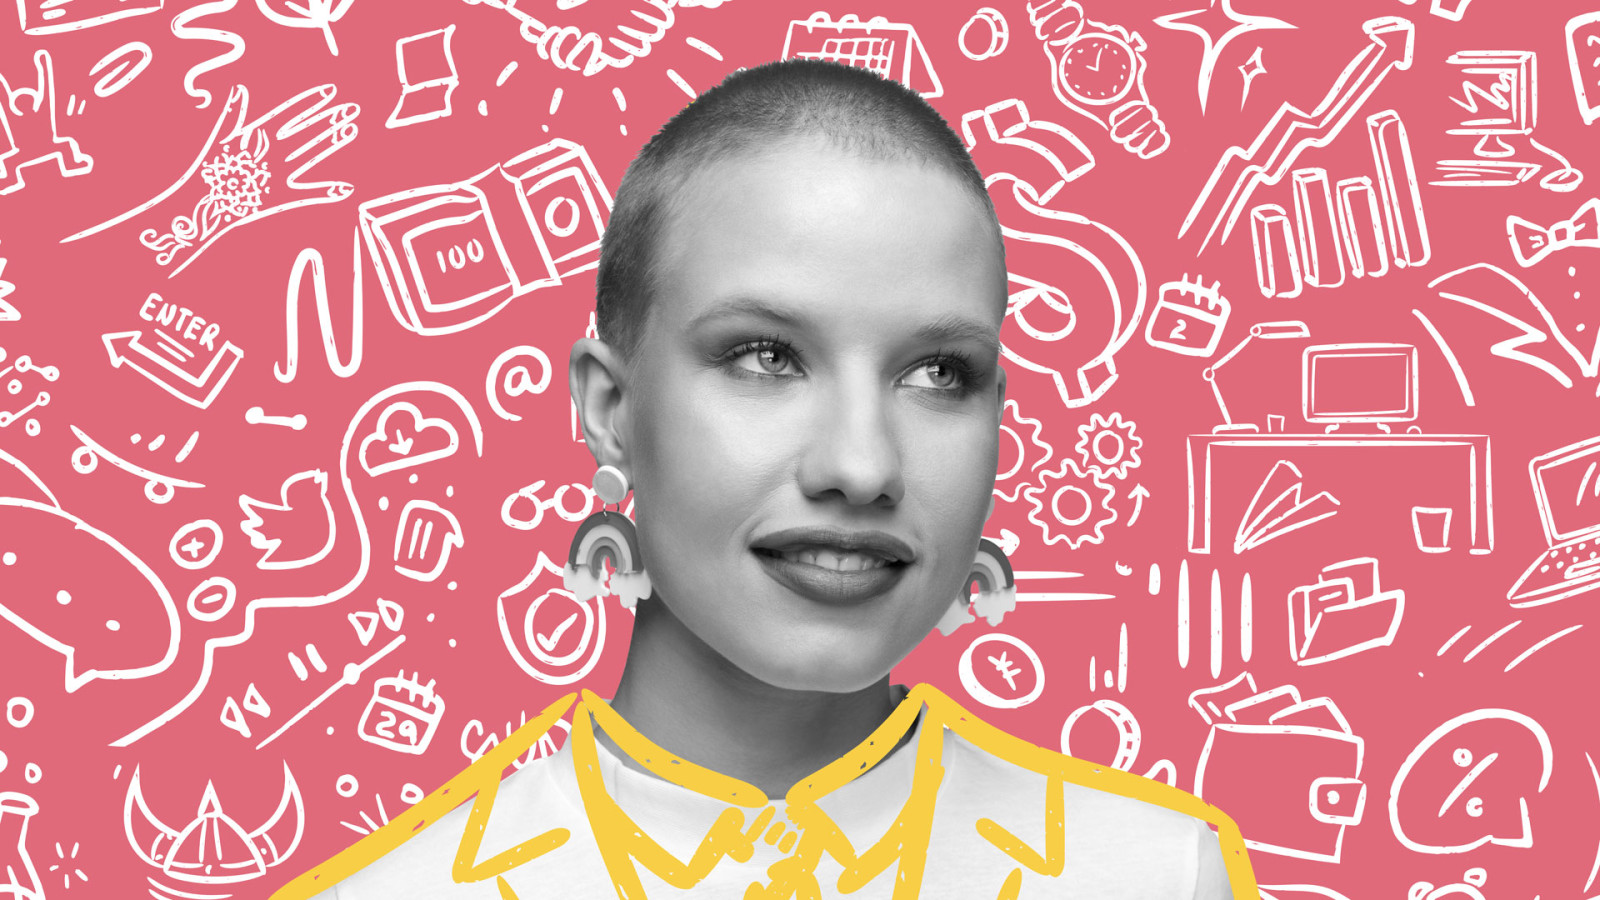 Image of shaved head girl on white doodles coral background for GMAC campaign as Content marketing page cover